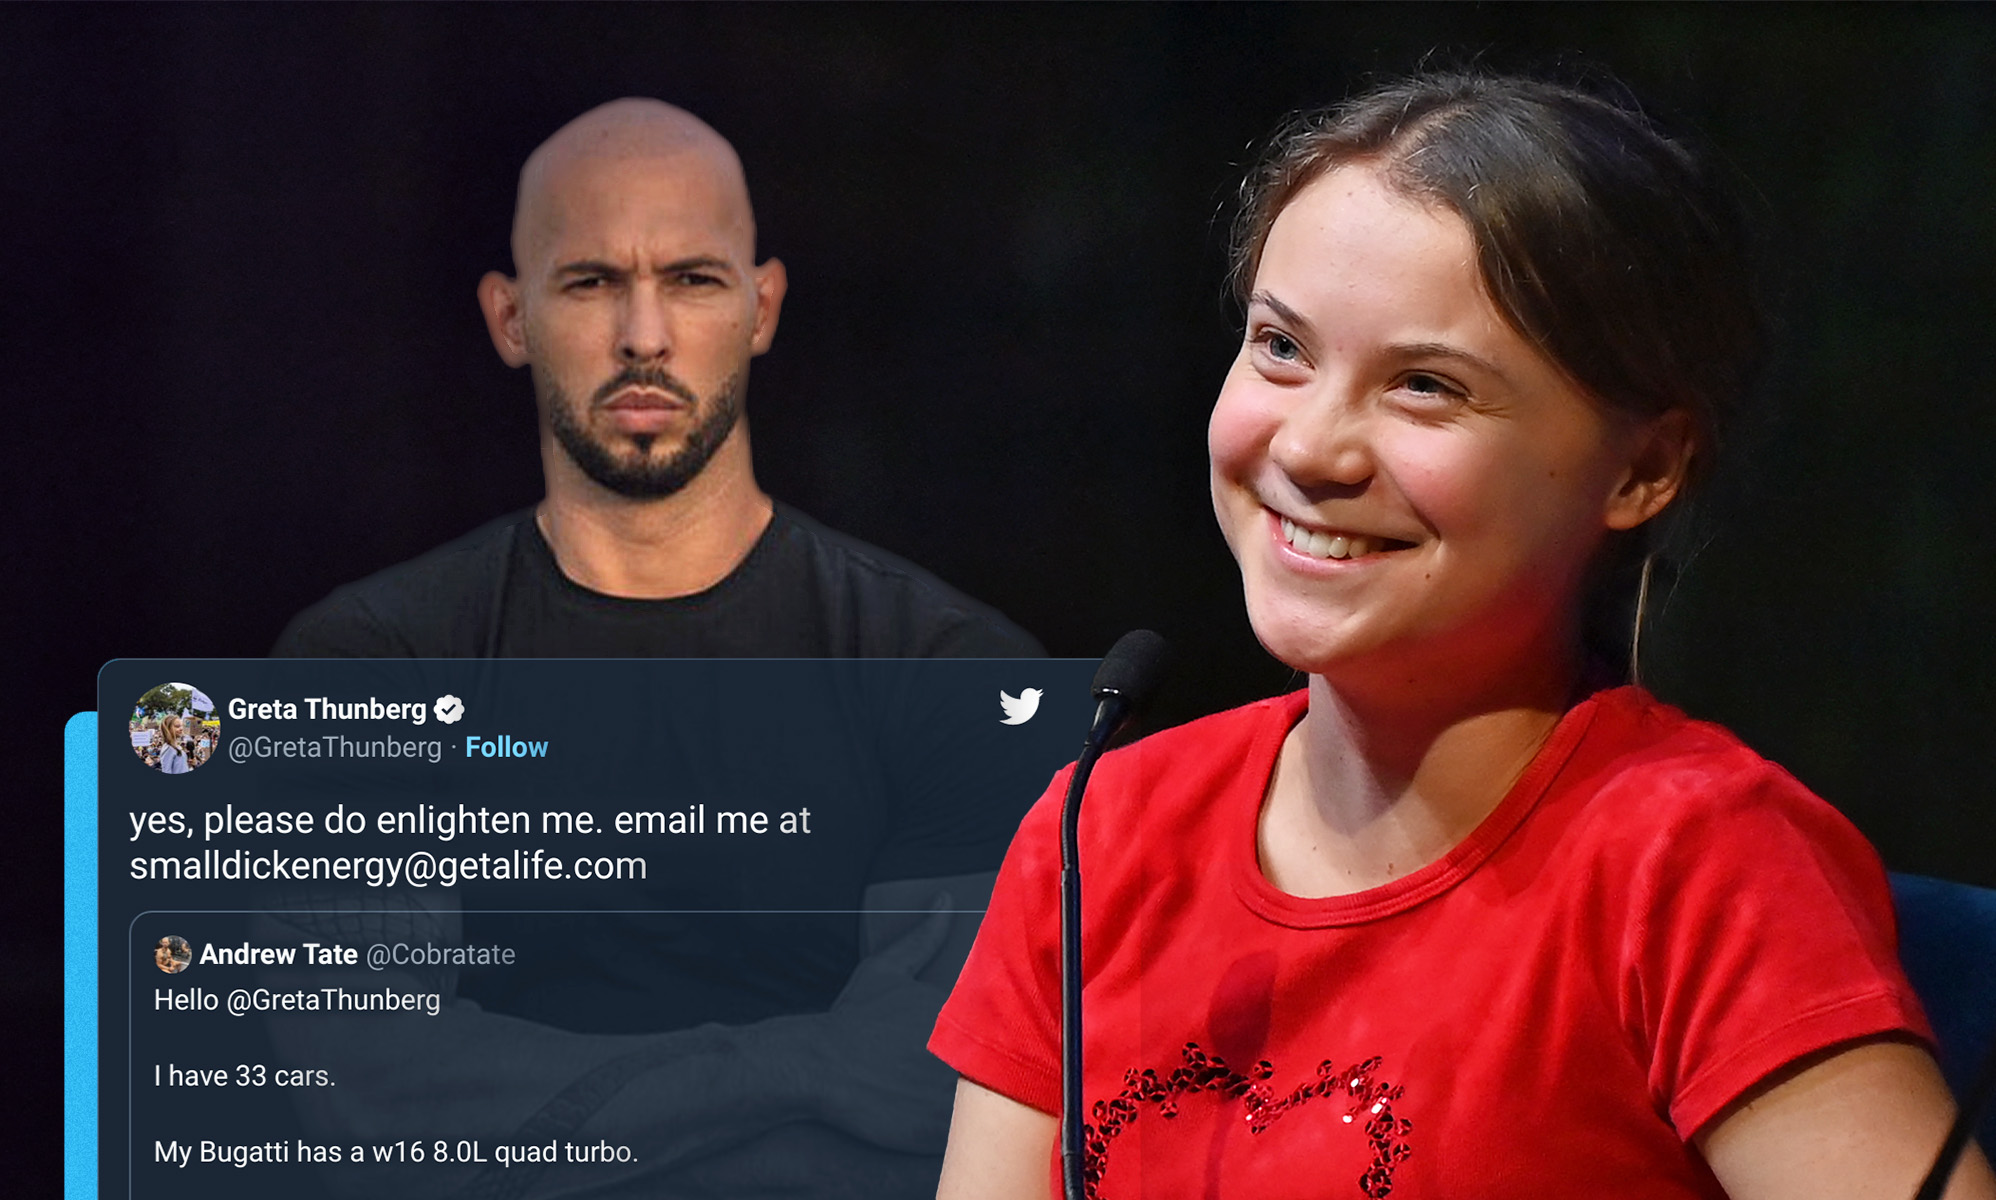 Andrew Tate tries and fails to clap back at Greta Thunberg